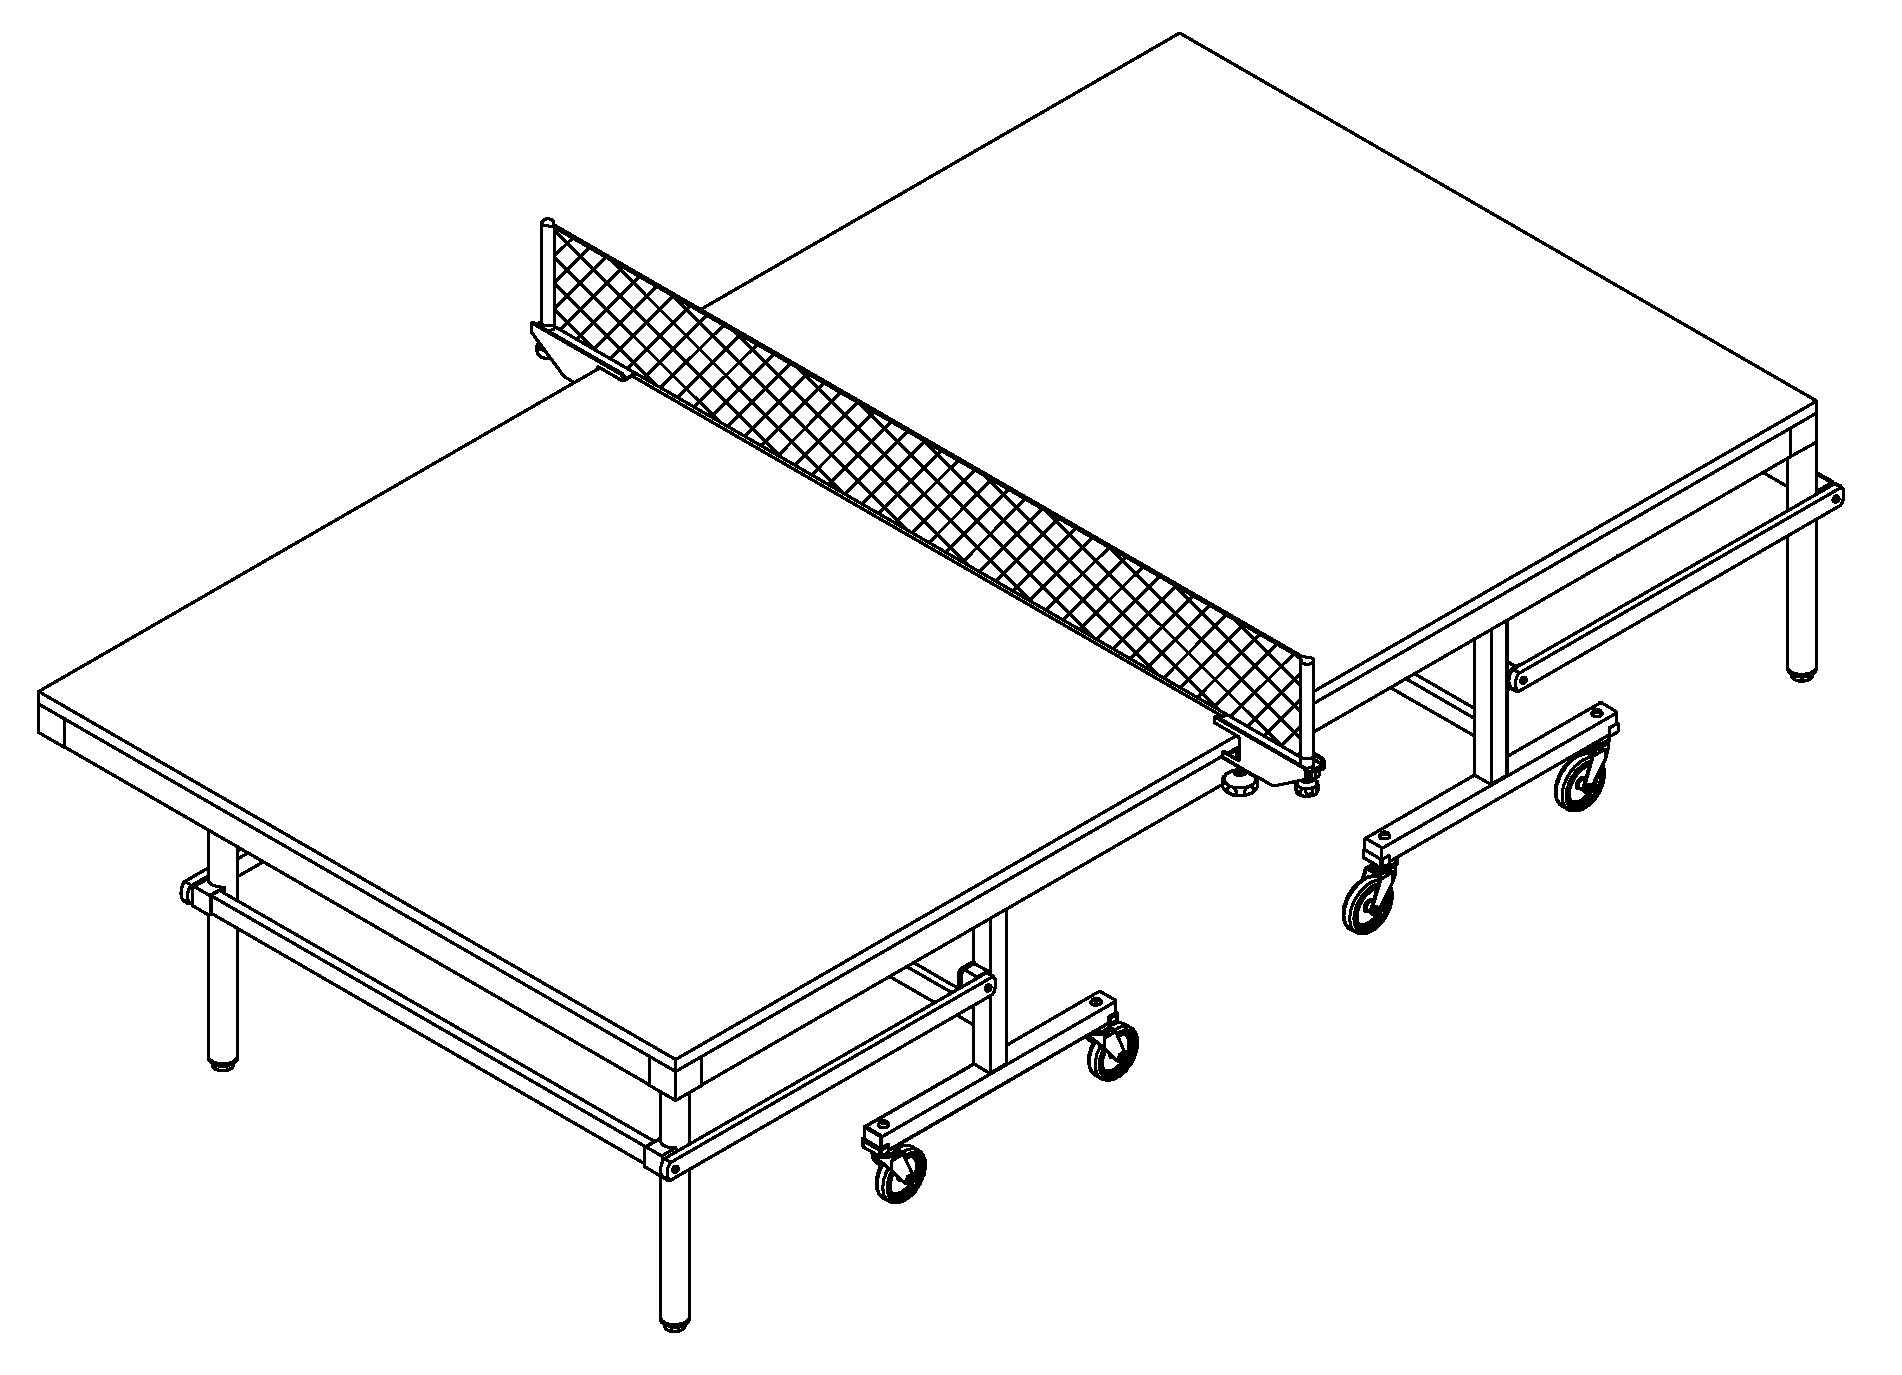 Folding assembly of table tennis table